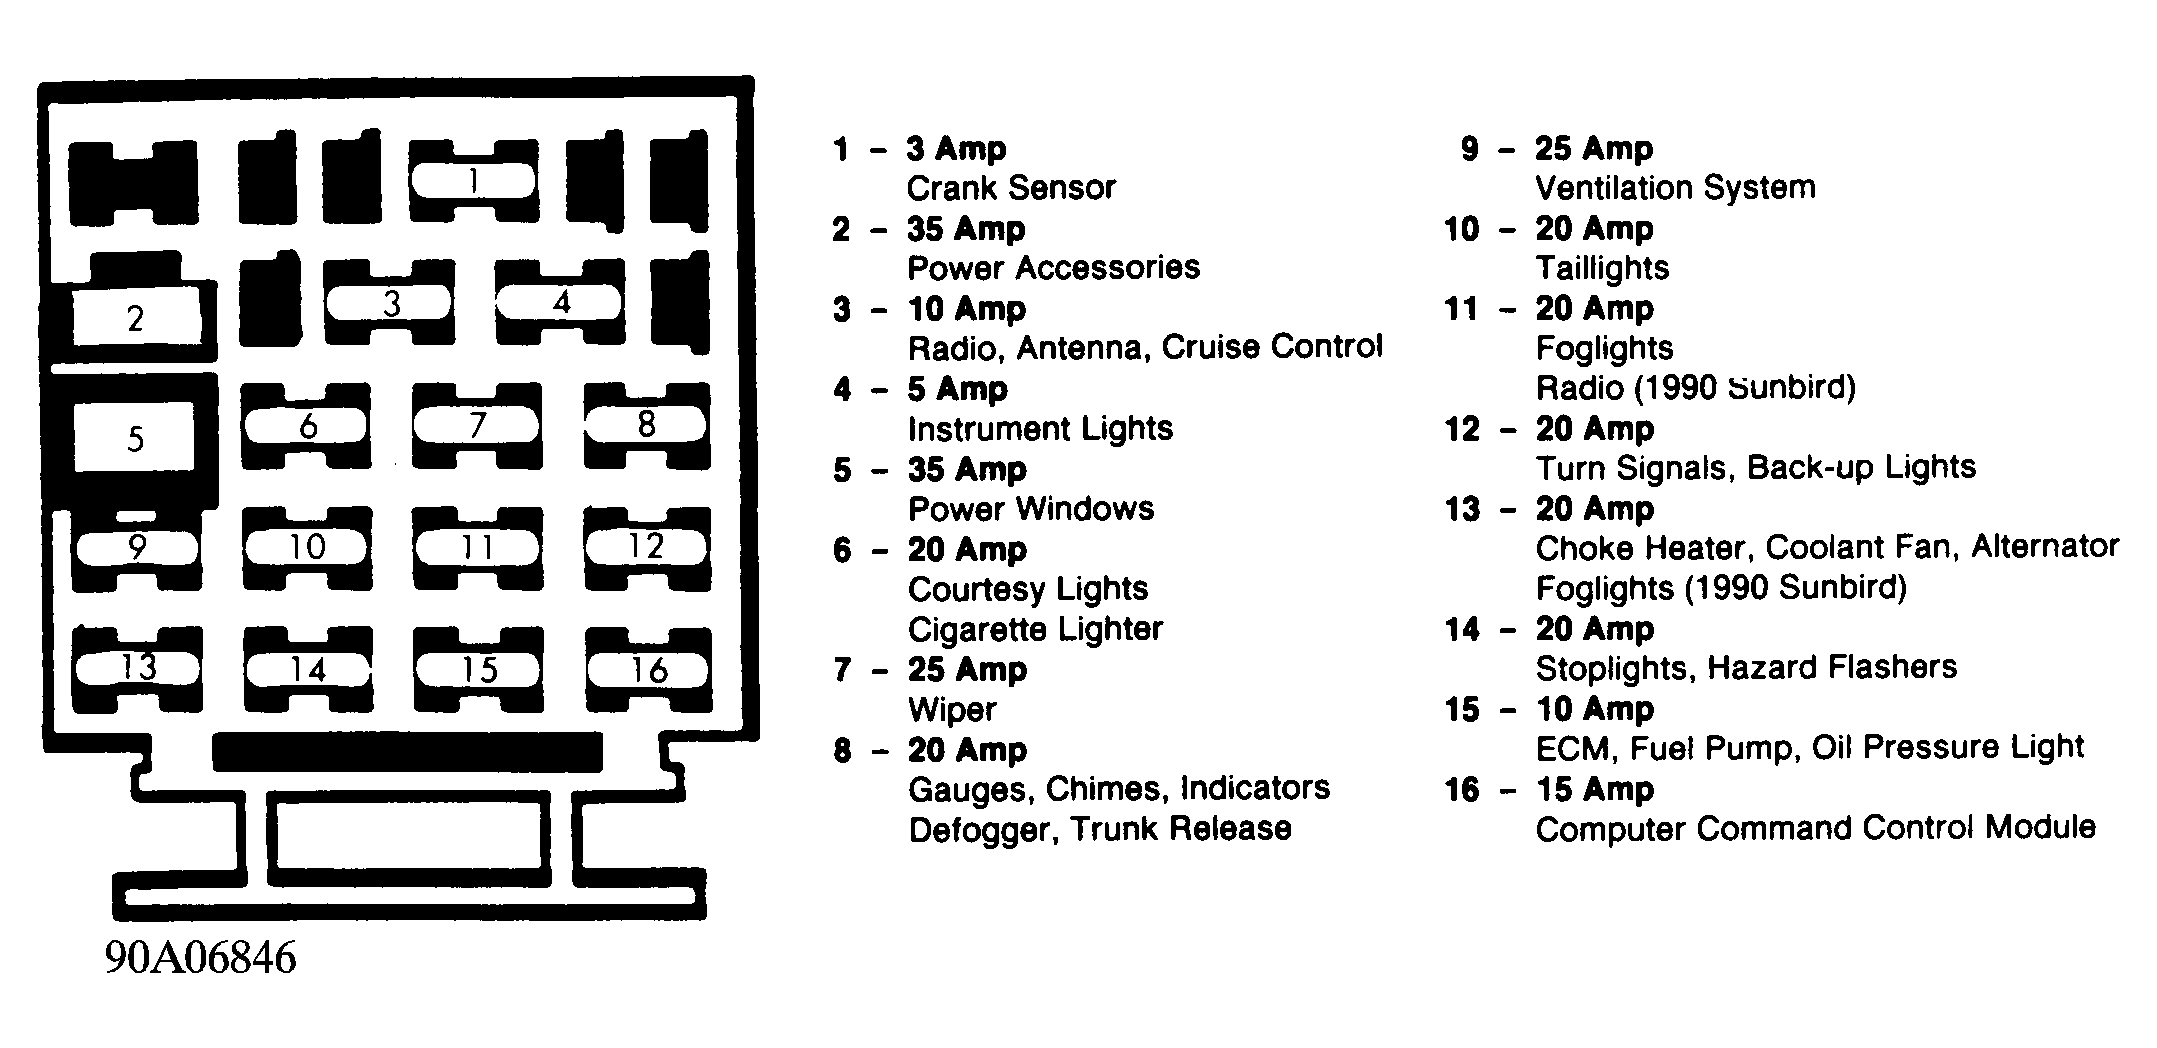 Chevrolet Cavalier VL 1994 - Component Locations -  Fuse Panel Identification (Typical 1983-90 Models)